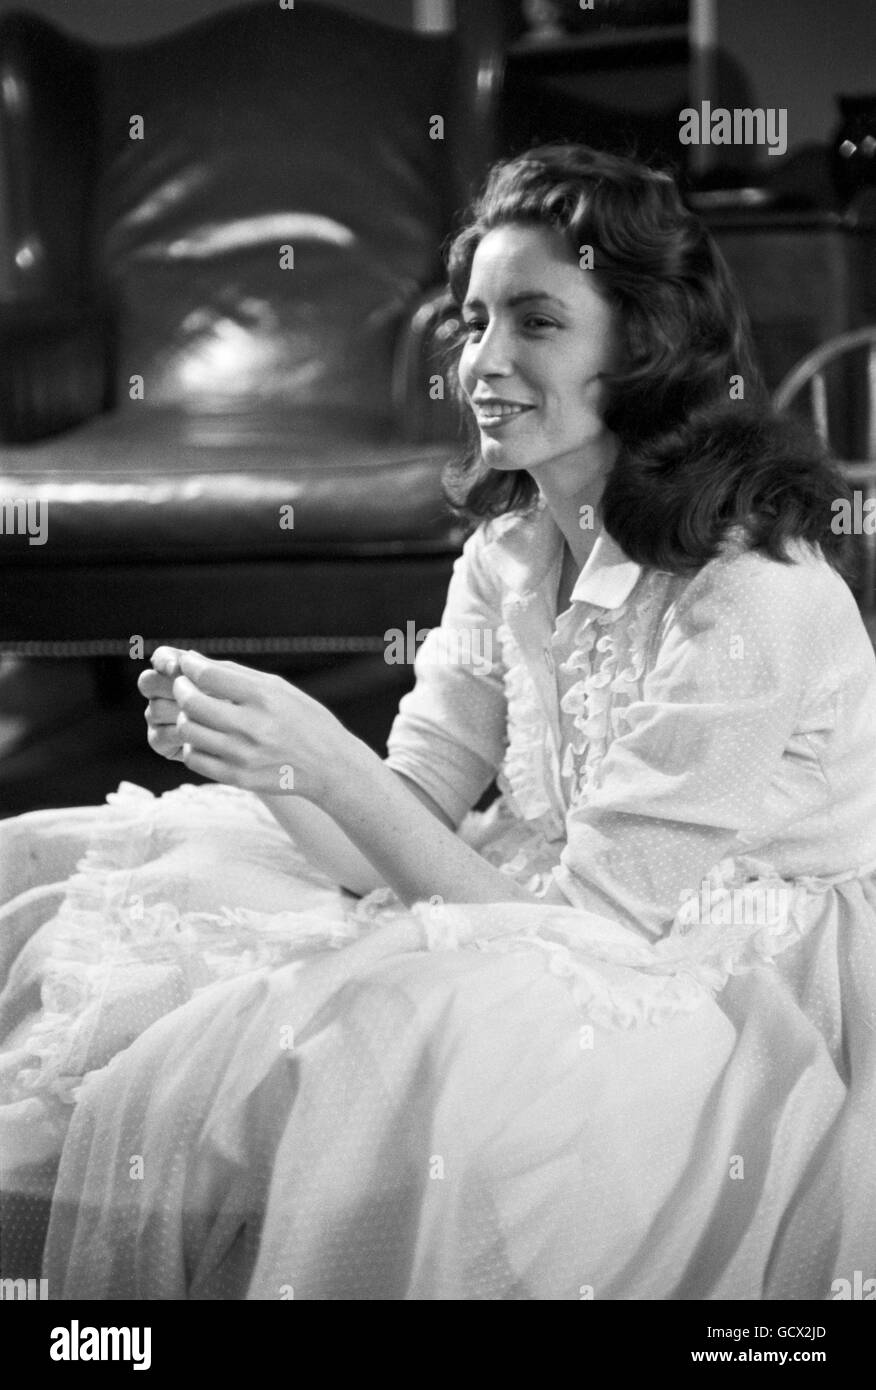 June Carter, photographed at home in 1956. The location is somewhat uncertain, but is most likely Madison Tennessee. Stock Photo